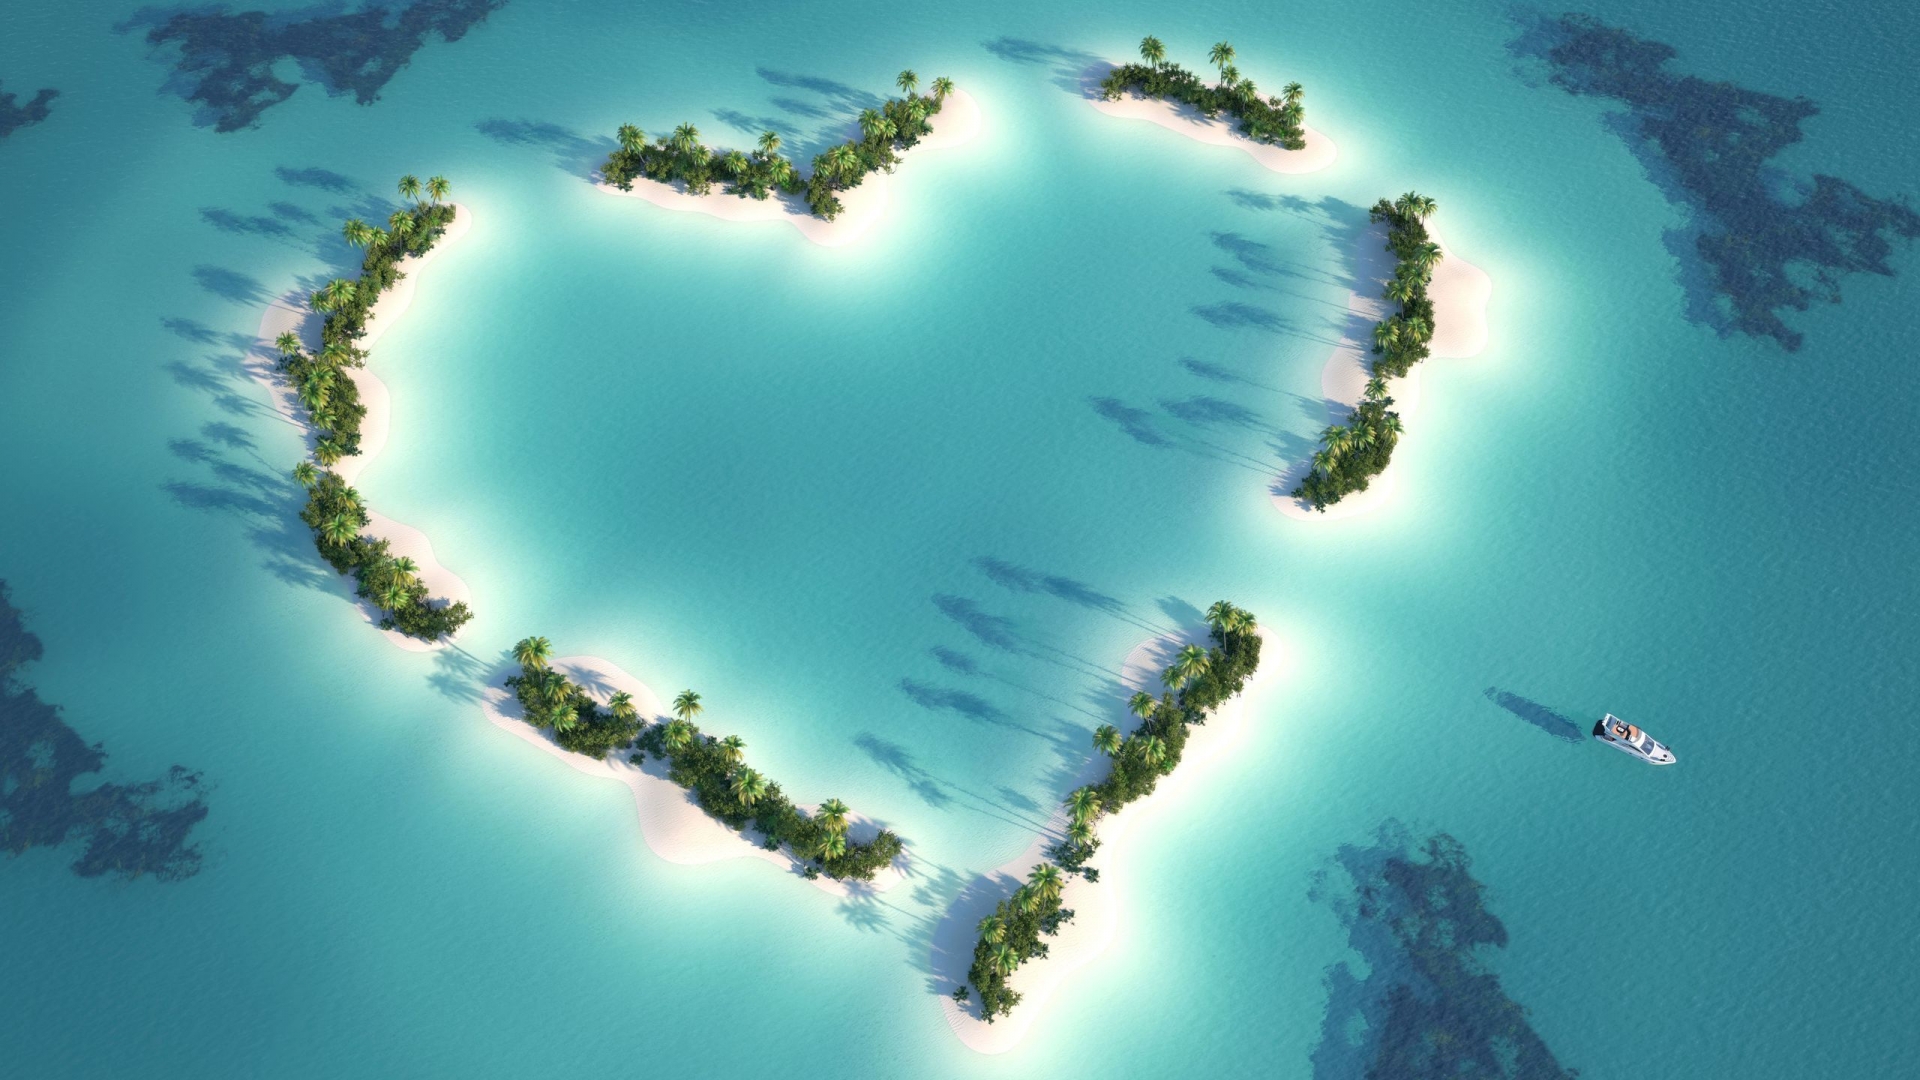 The Love Island for 1920 x 1080 HDTV 1080p resolution